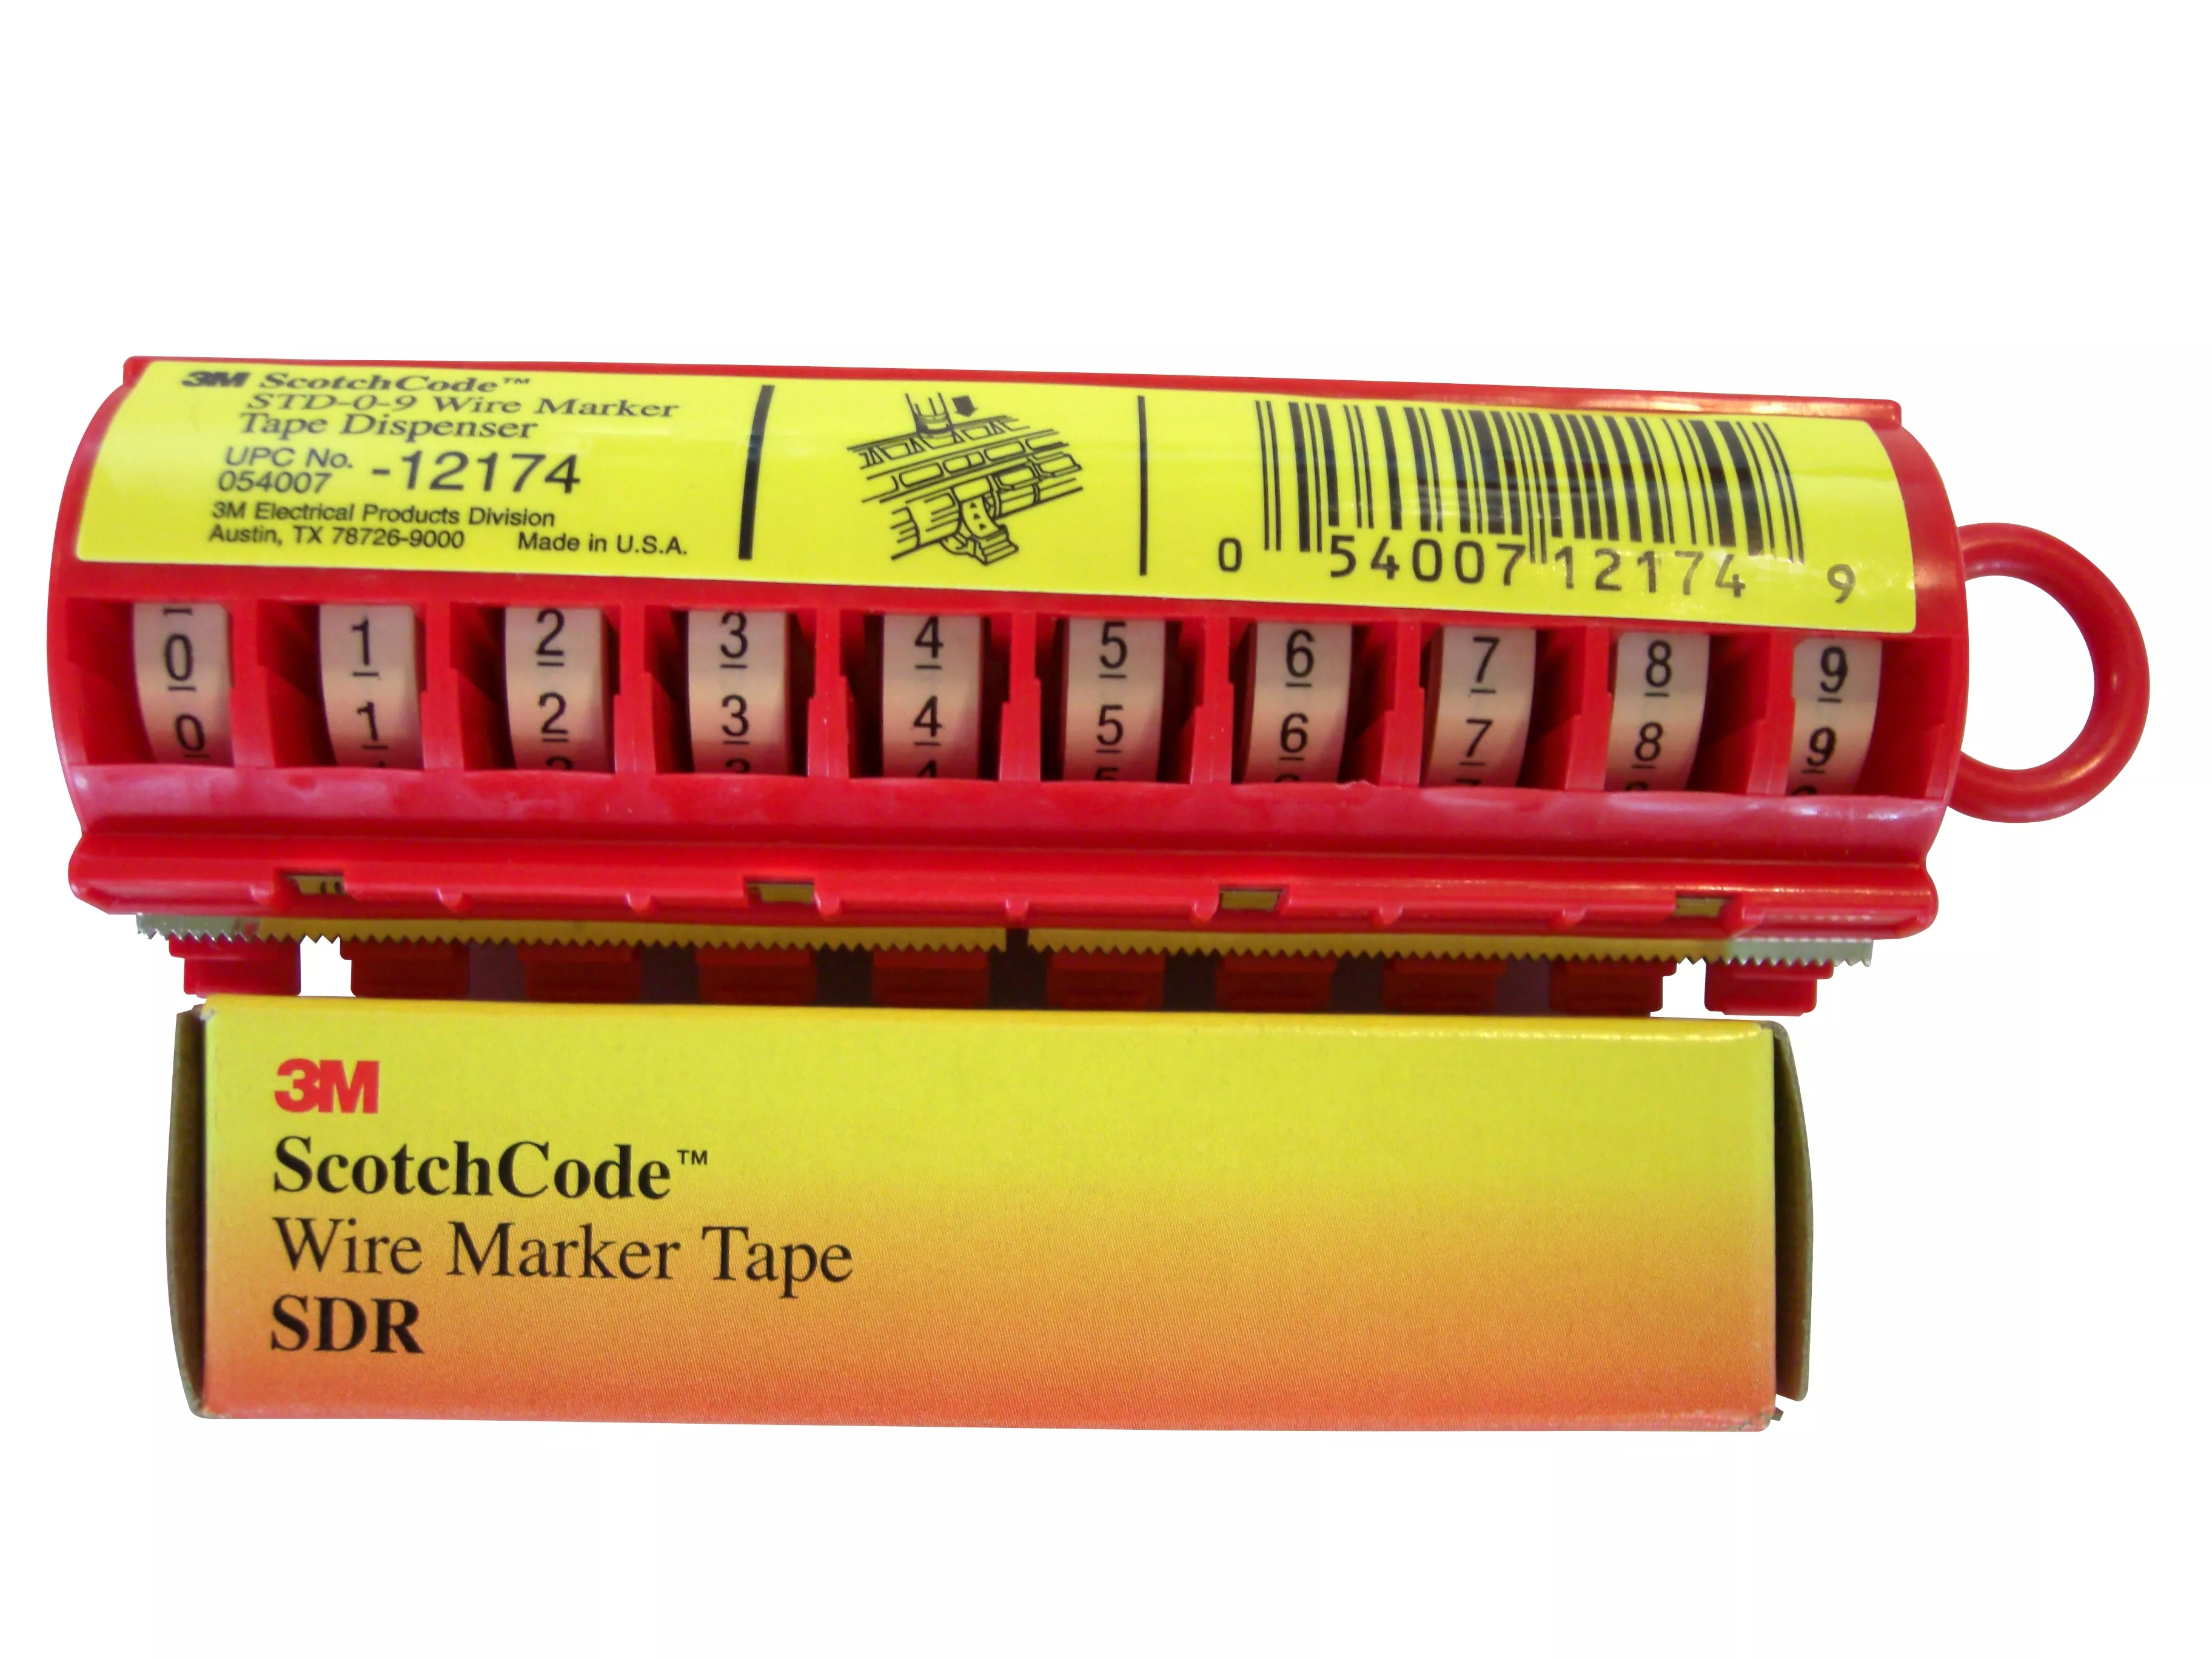 UPC 10054007094262 | 3M™ ScotchCode™ Wire Marker Tape Refill Roll SDR-GN